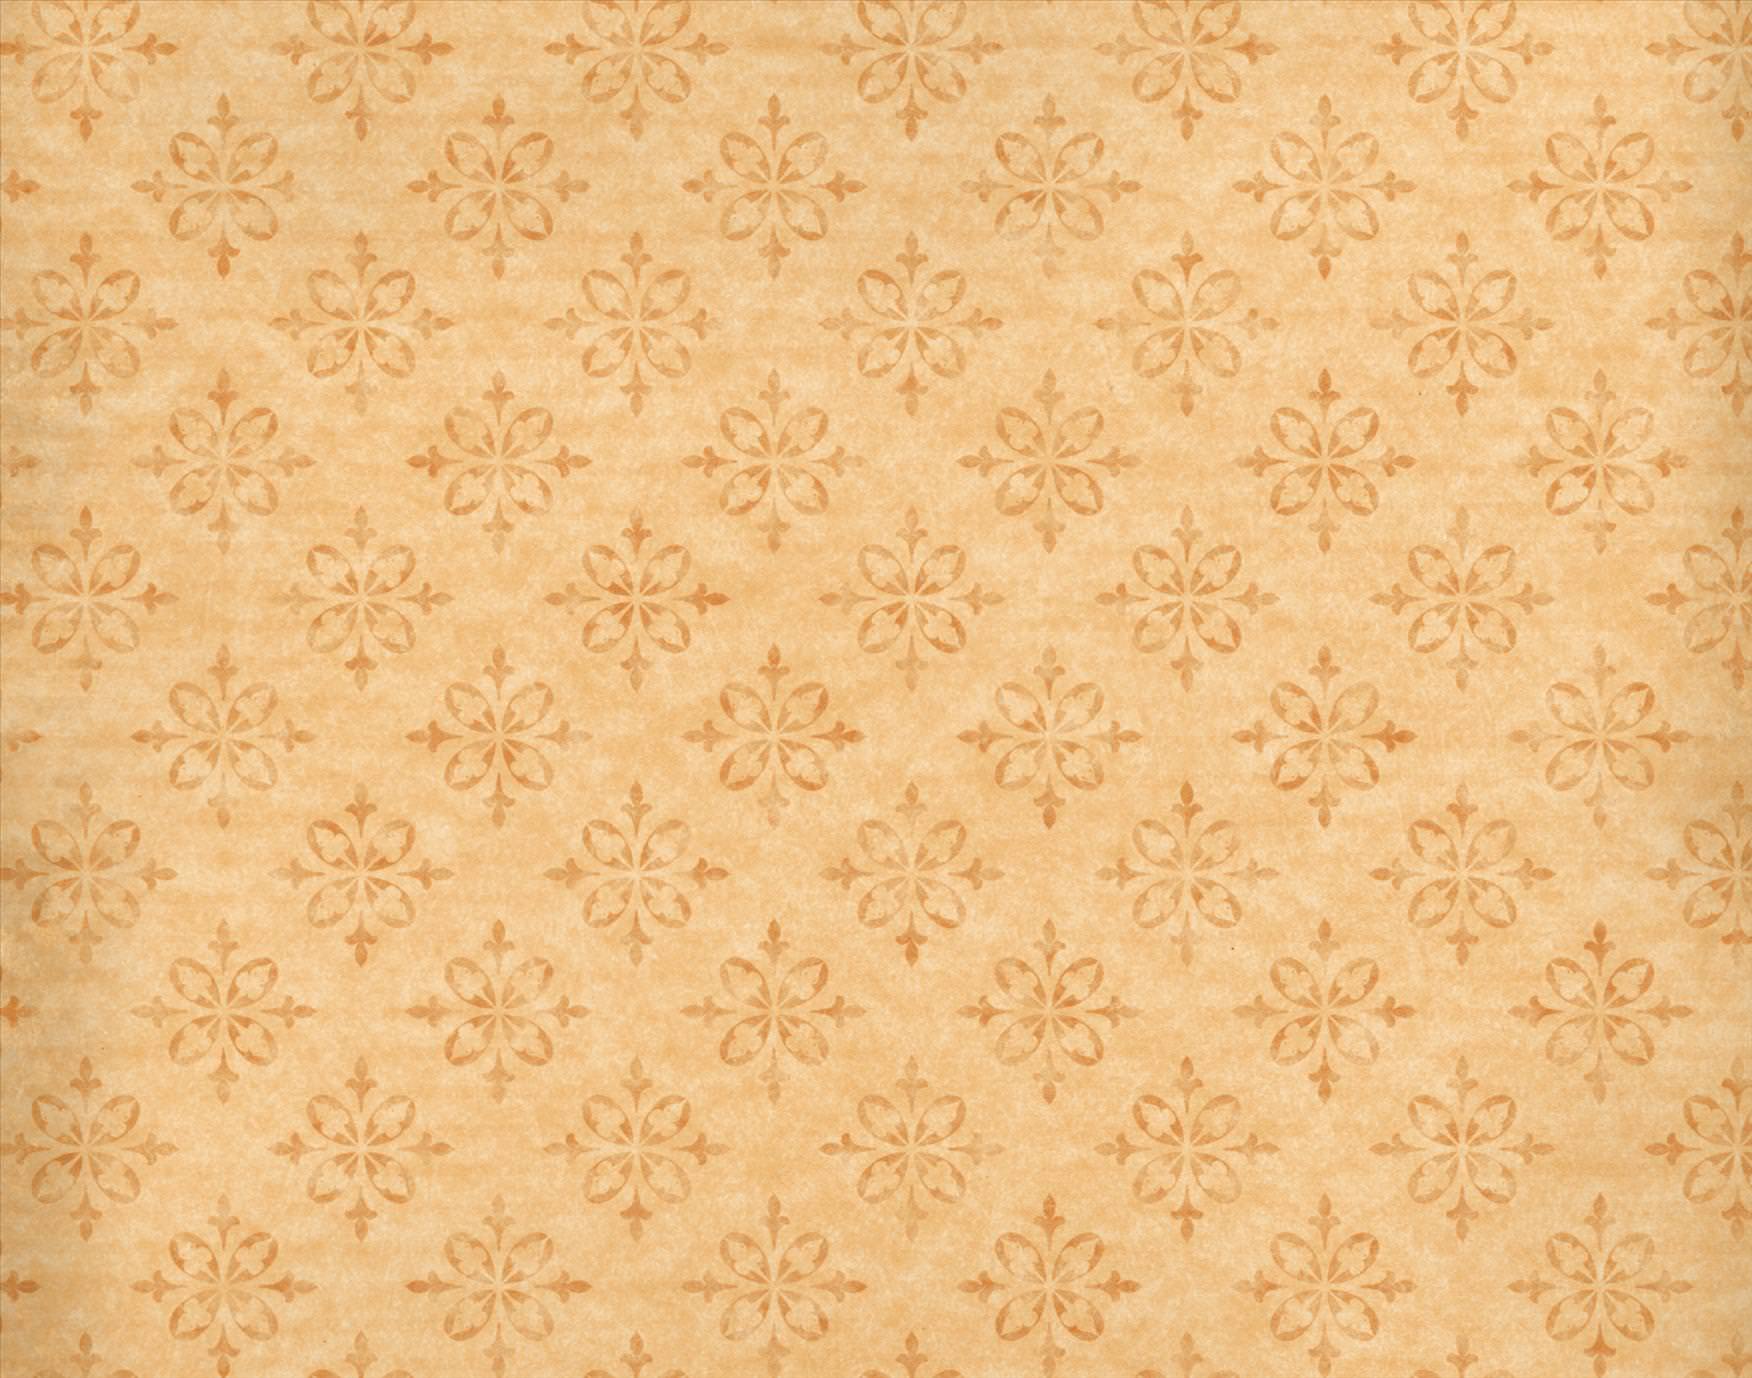 Awesome Hd Vintage Image - Light Brown Background Pattern - HD Wallpaper 